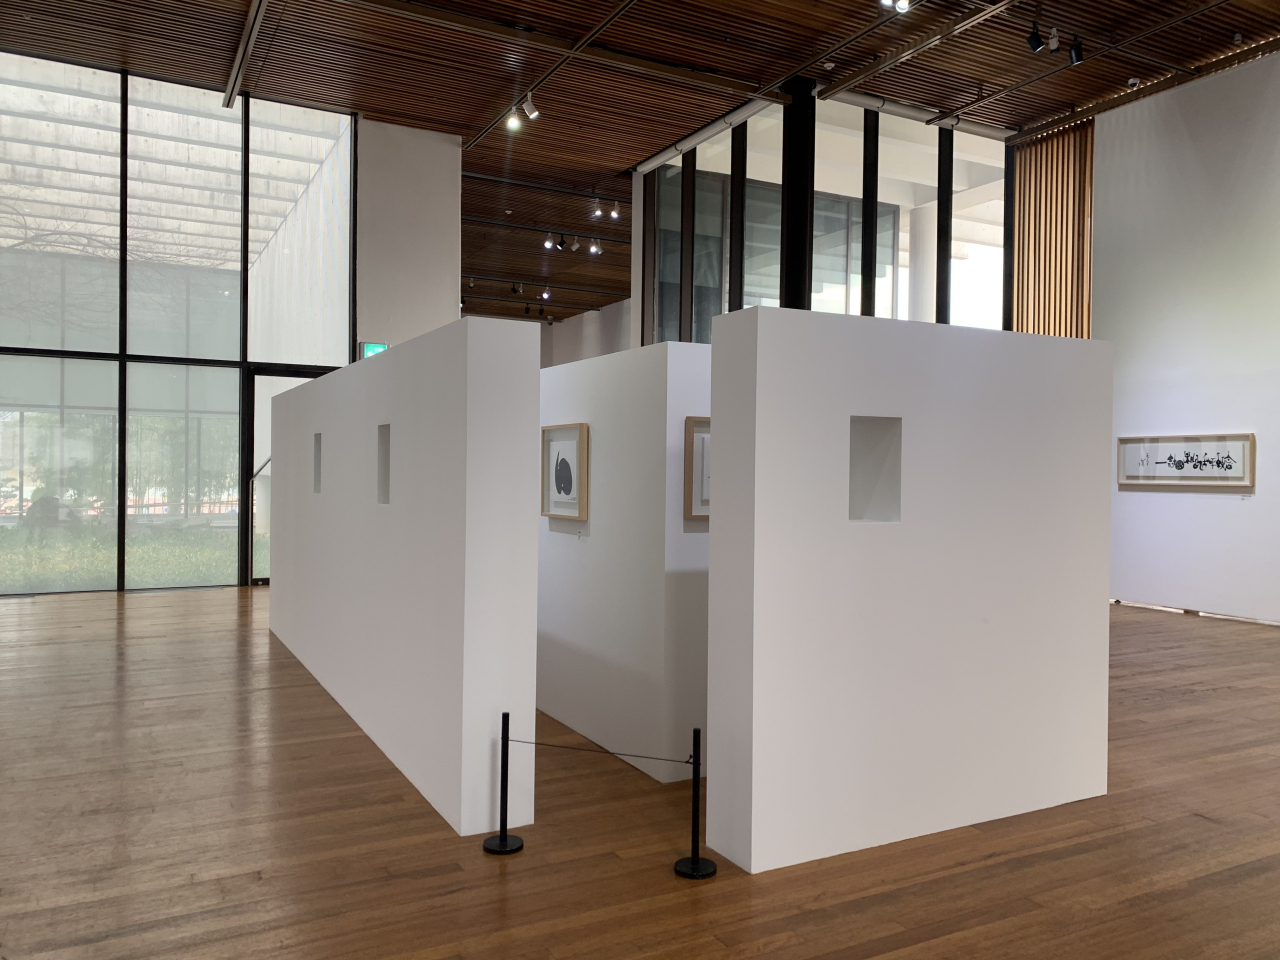 An installation of works at the exhibition is a reminder of the artist's imprisonment in the late 1960s. (Lee Ungno Museum)